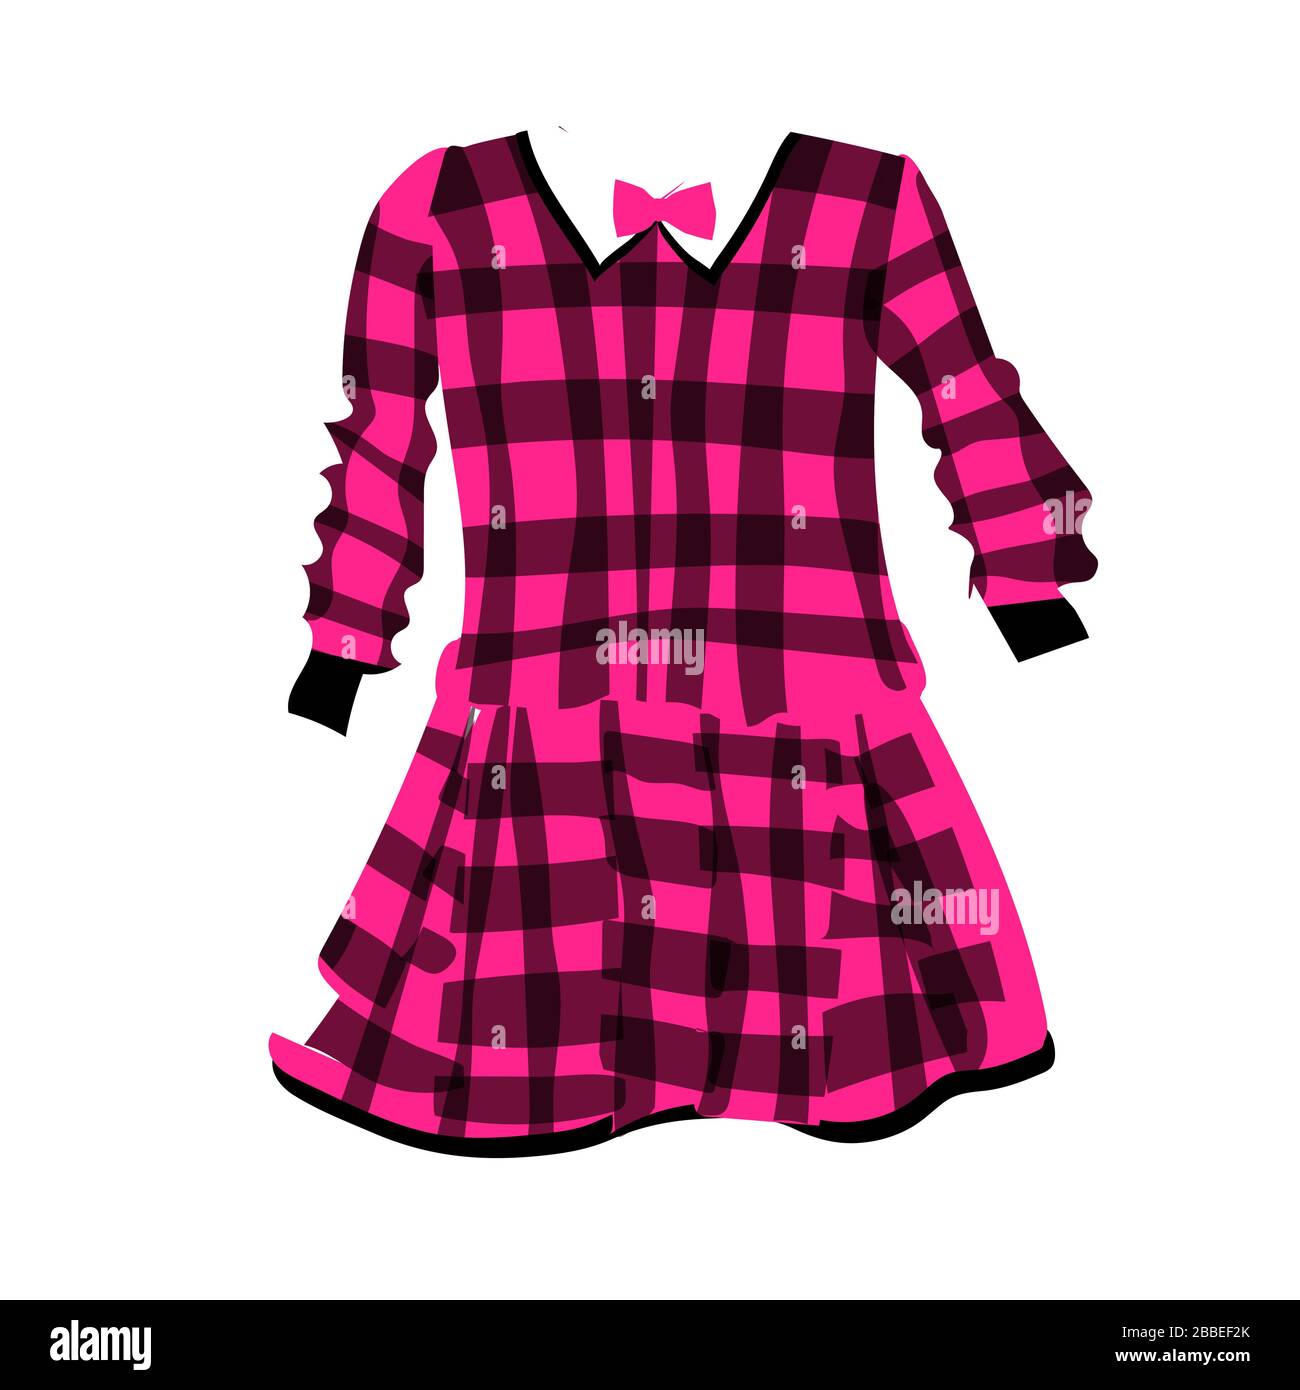 Plaid dress for girls. Fashionable clothes for kids. Vector illustration on a white background. School uniform. Stock Vector